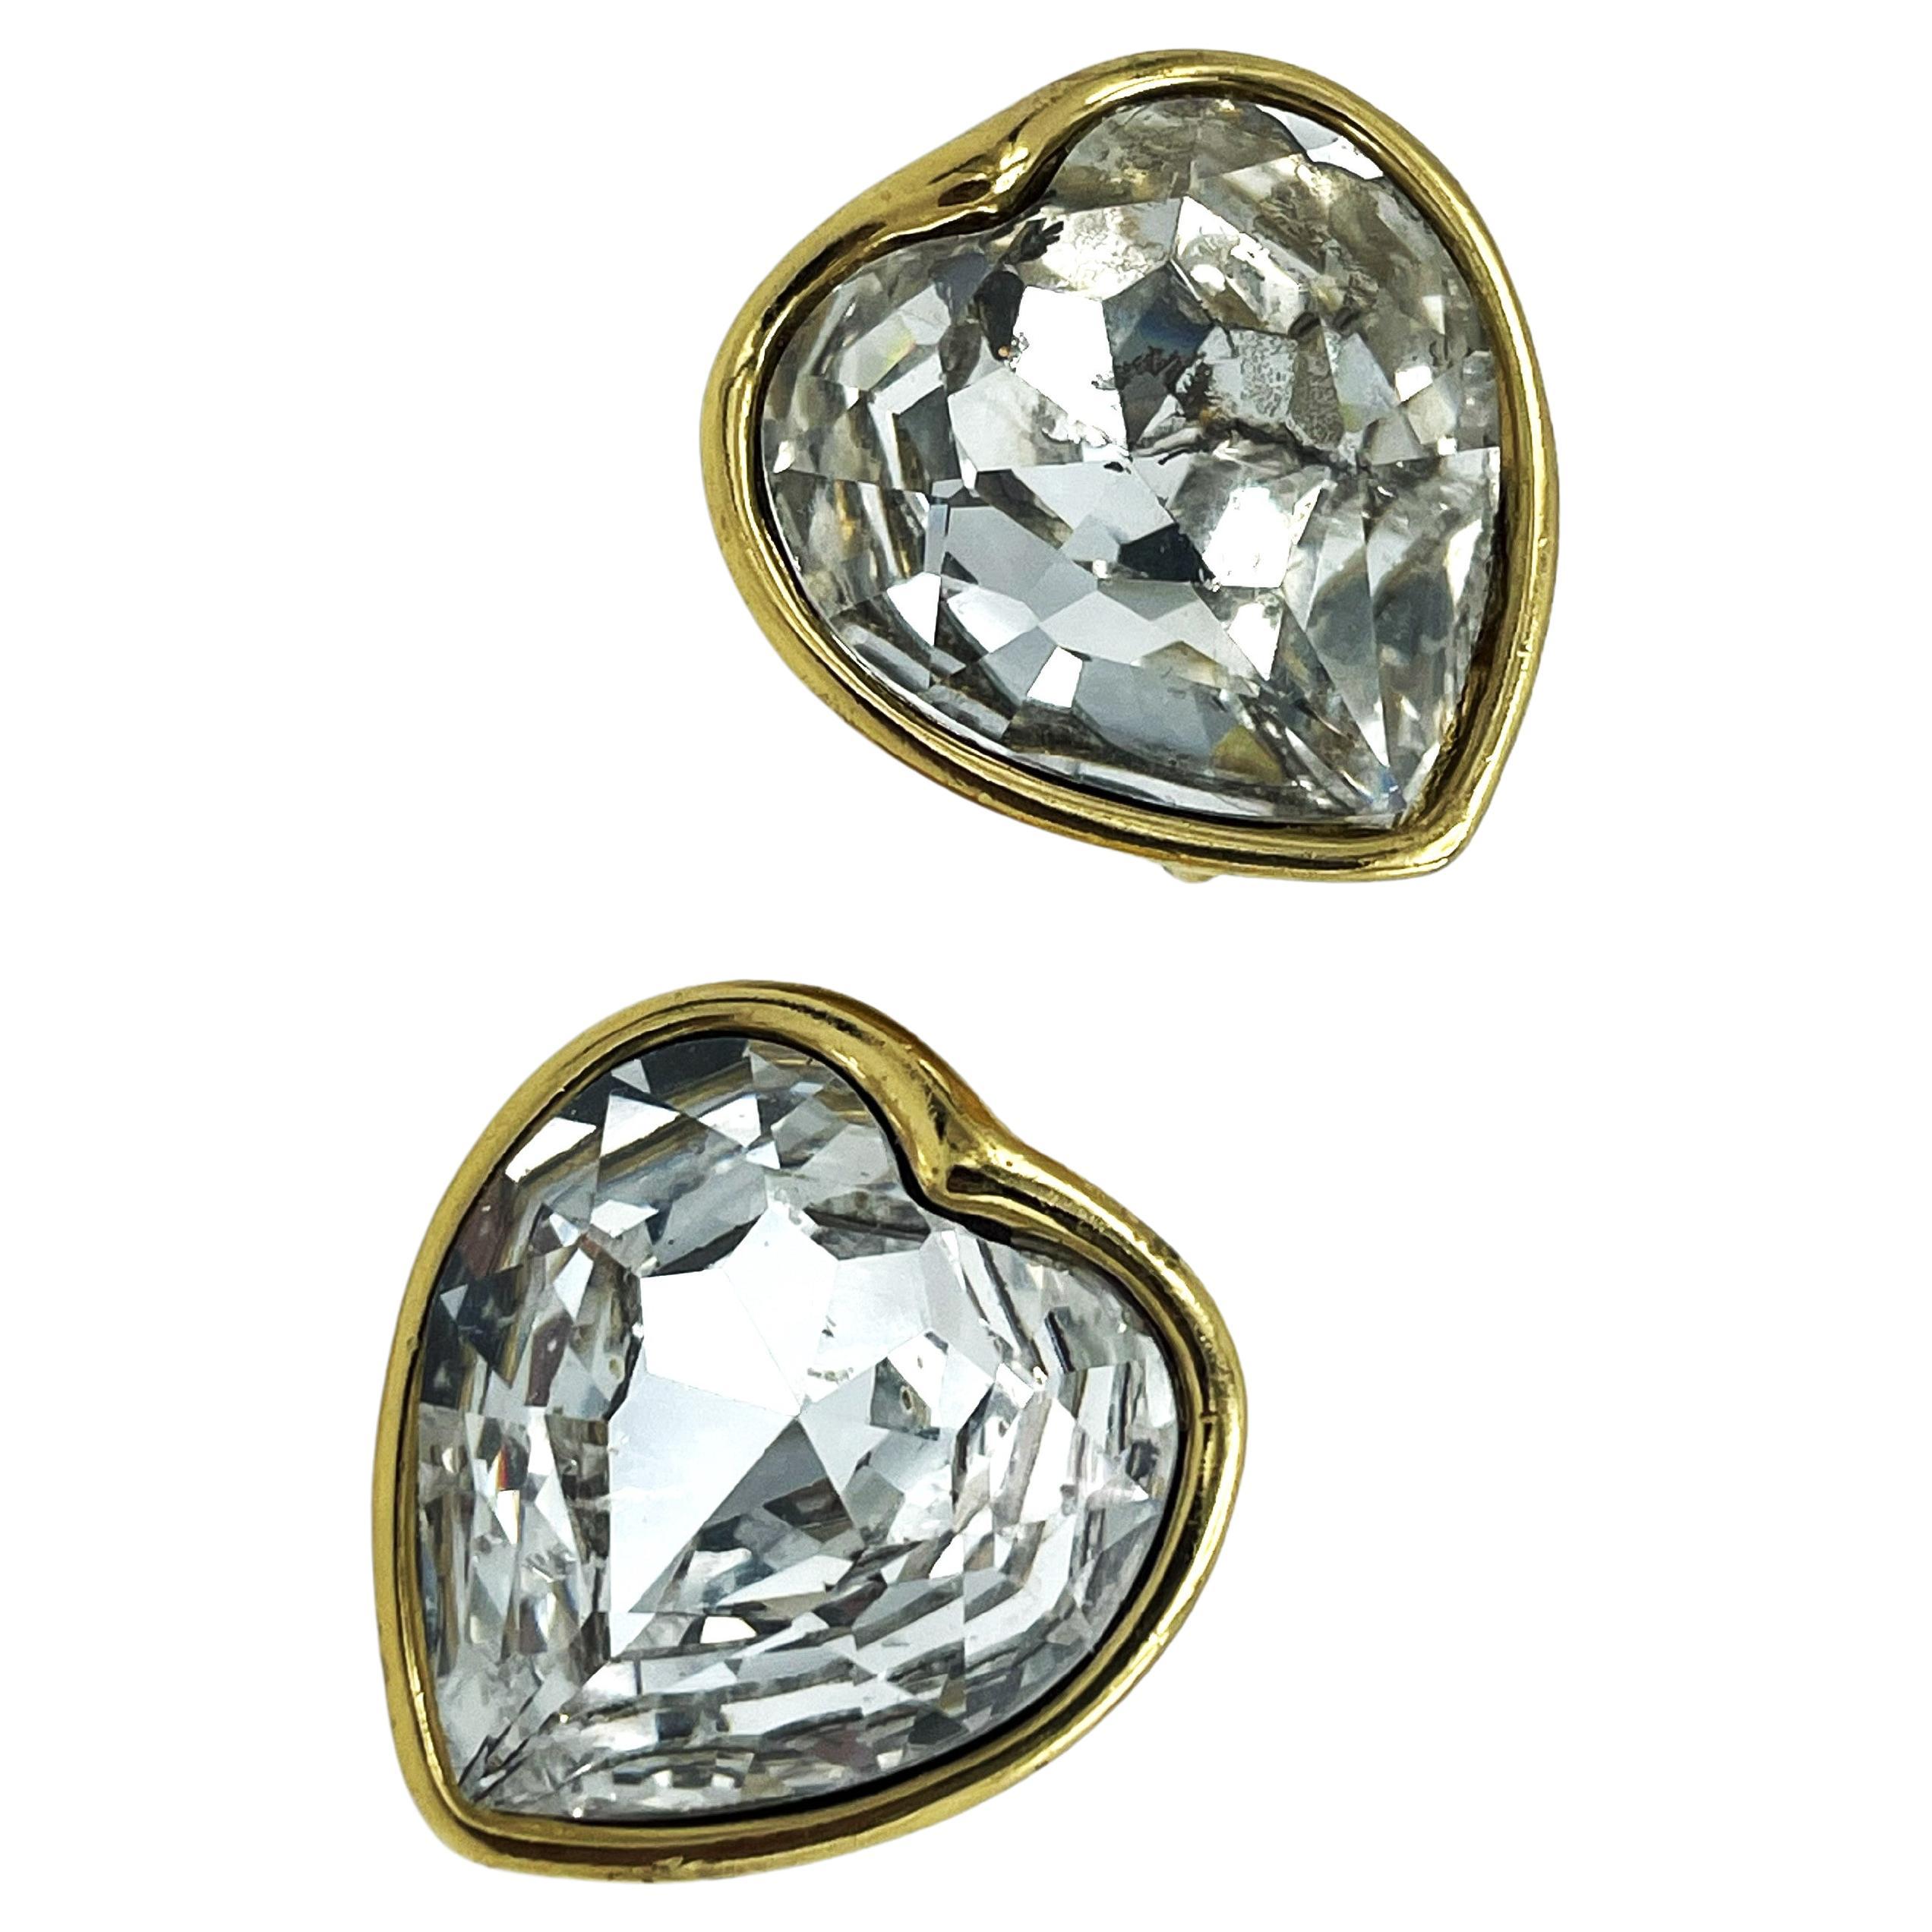 YVES SAINT LAURENT (MADE IN FRANCE) HEART CLIP-ON EARRING. Truly magnificent, fabulous and over sized 'HEART' earring. consisting of a large cut rhinestone heart. 

Measurement
Width 3.1cm
Height 3.3 cm
Deep 1.4cm